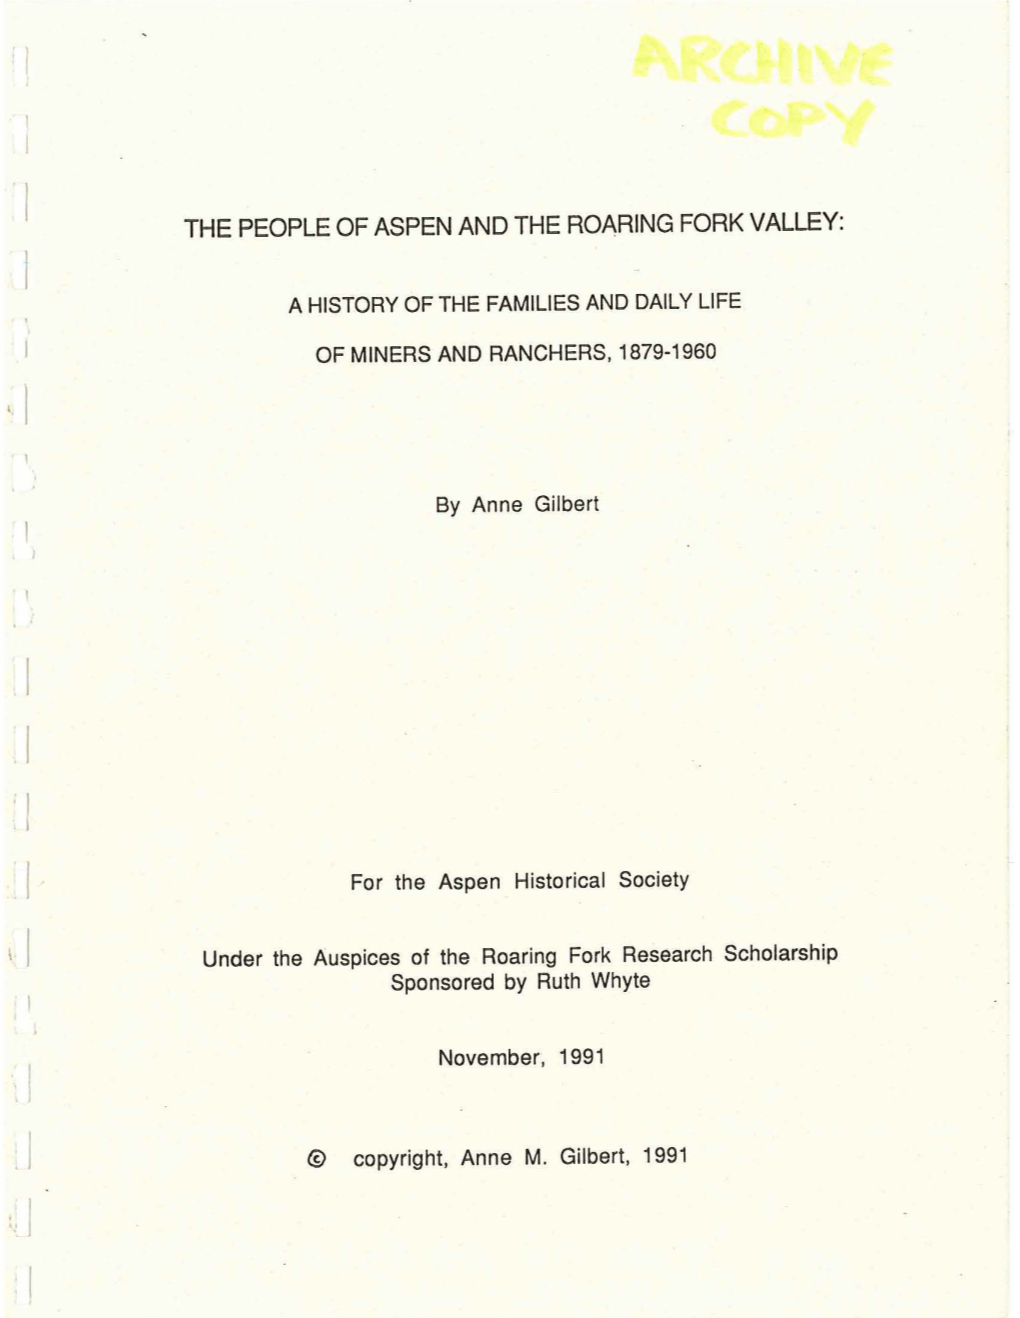 People of Aspen and the Roaring Fork Valley 1879-1960